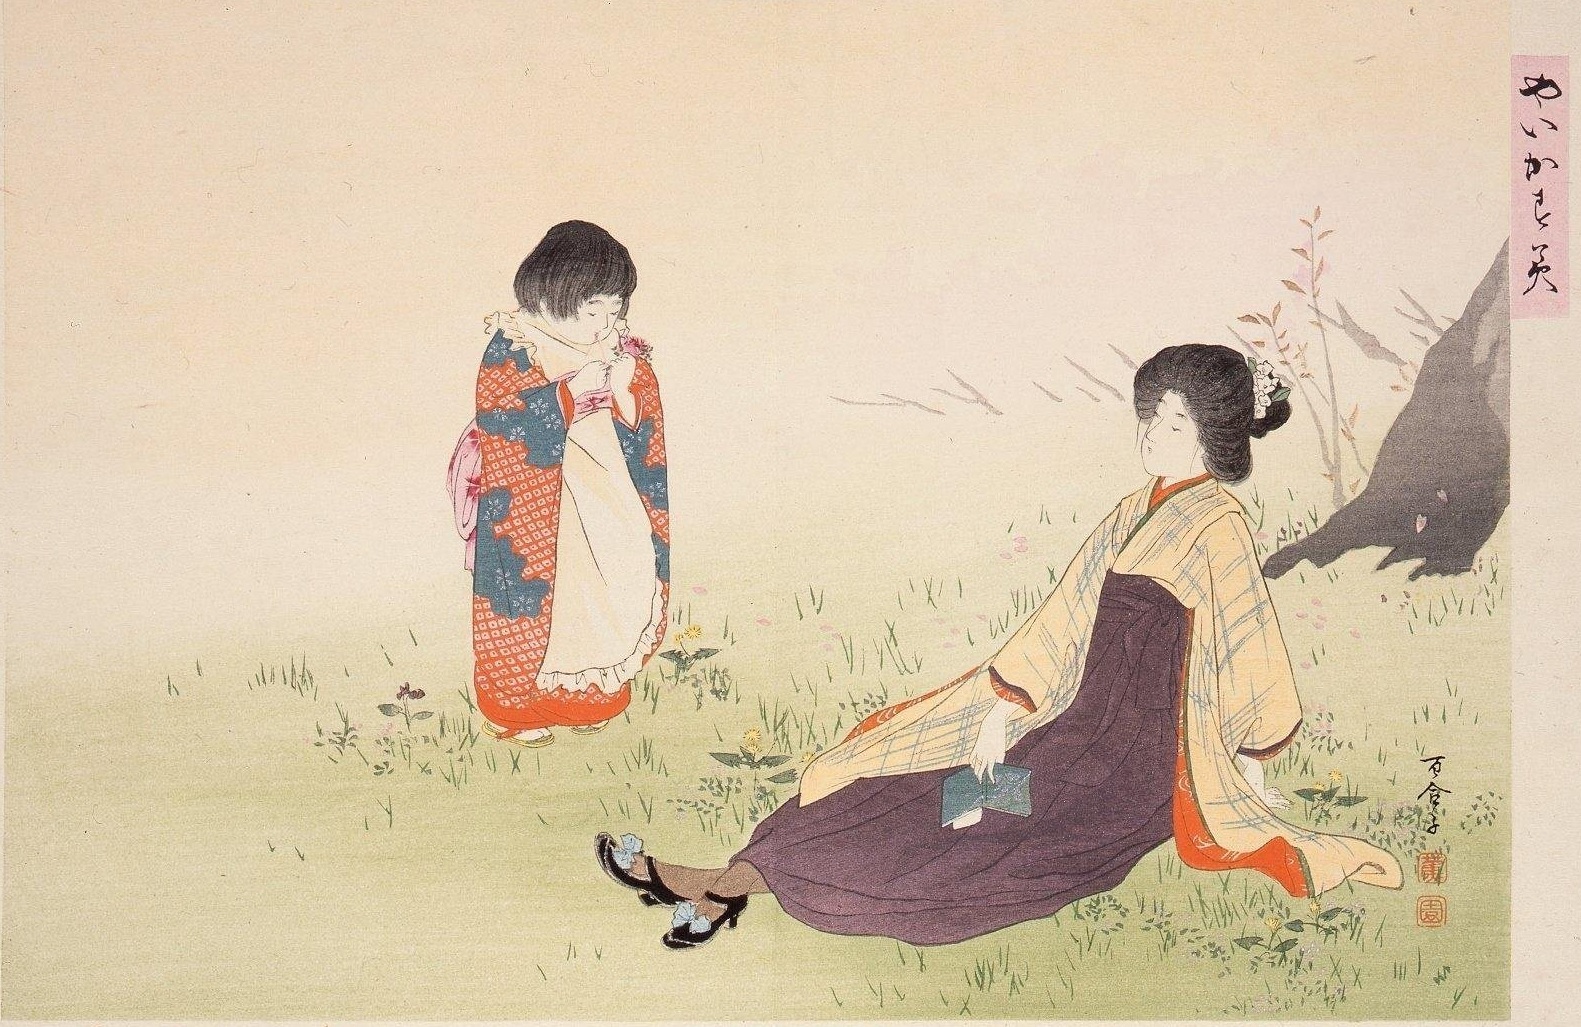 "Gathering Spring Herbs" from the series "Streaked Mist" by Ikeda Shōen - 1906 - 25 x 35.5 cm Edo-Tokyo Museum